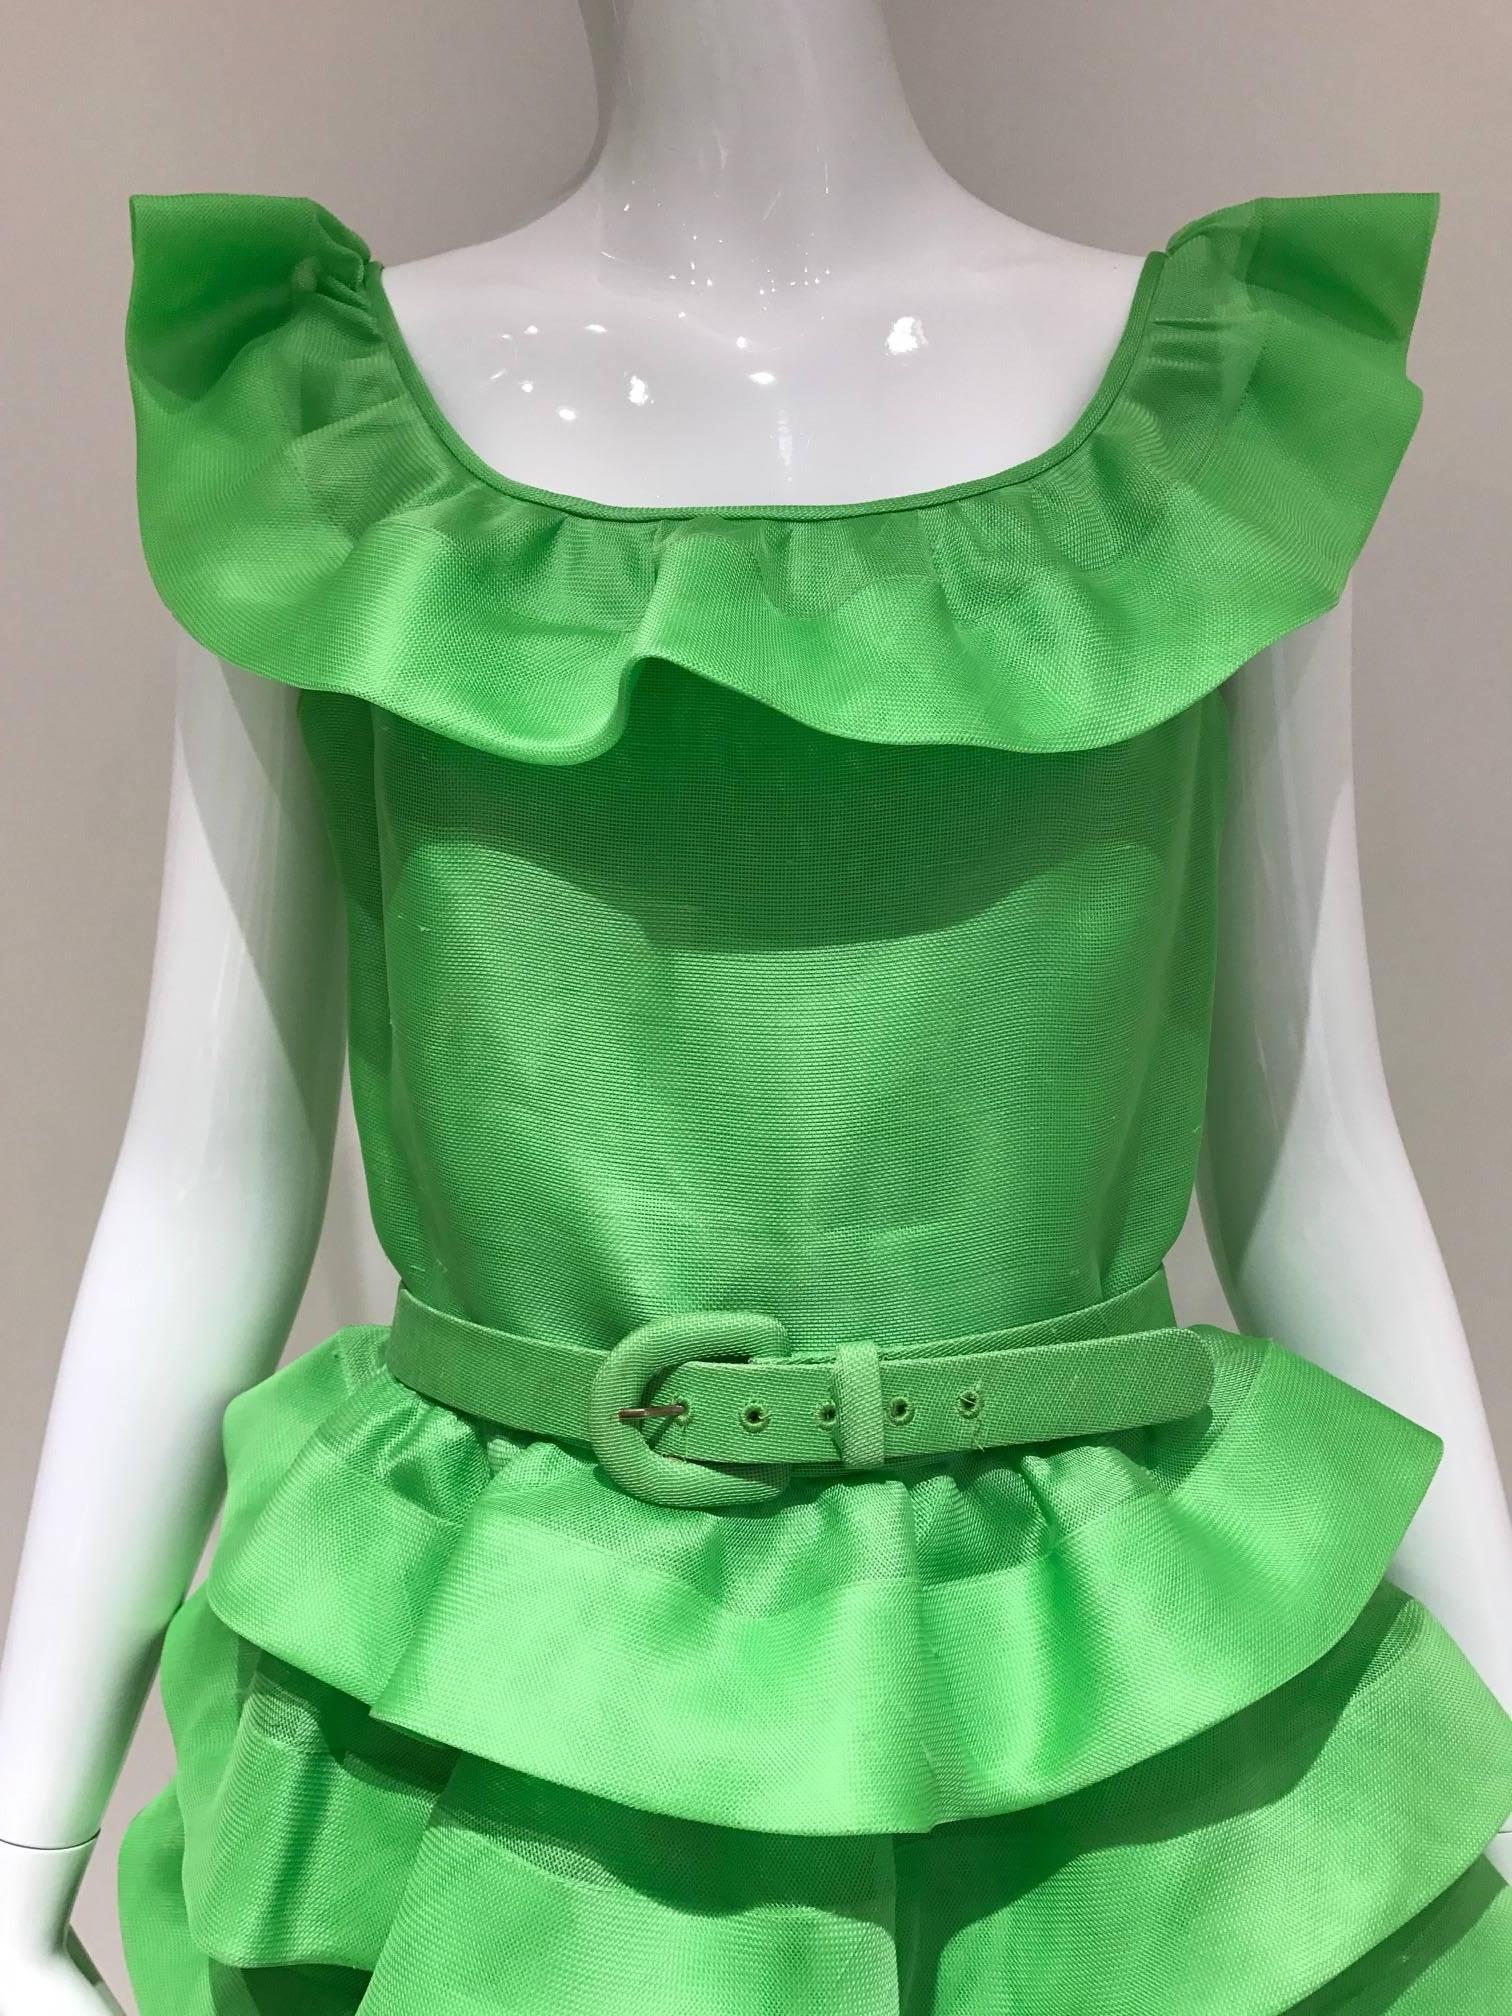 What a fun party organza ruffle dress from Oscar De La Renta sold at Saks Fifth ave.  Due to the nature of the fabric, there are slightly ribbed on the fabric. it is not damaged.
Bust 34 inches/ Waist: 28 inches/ Hip: 40 inches/ Length: 38 inches